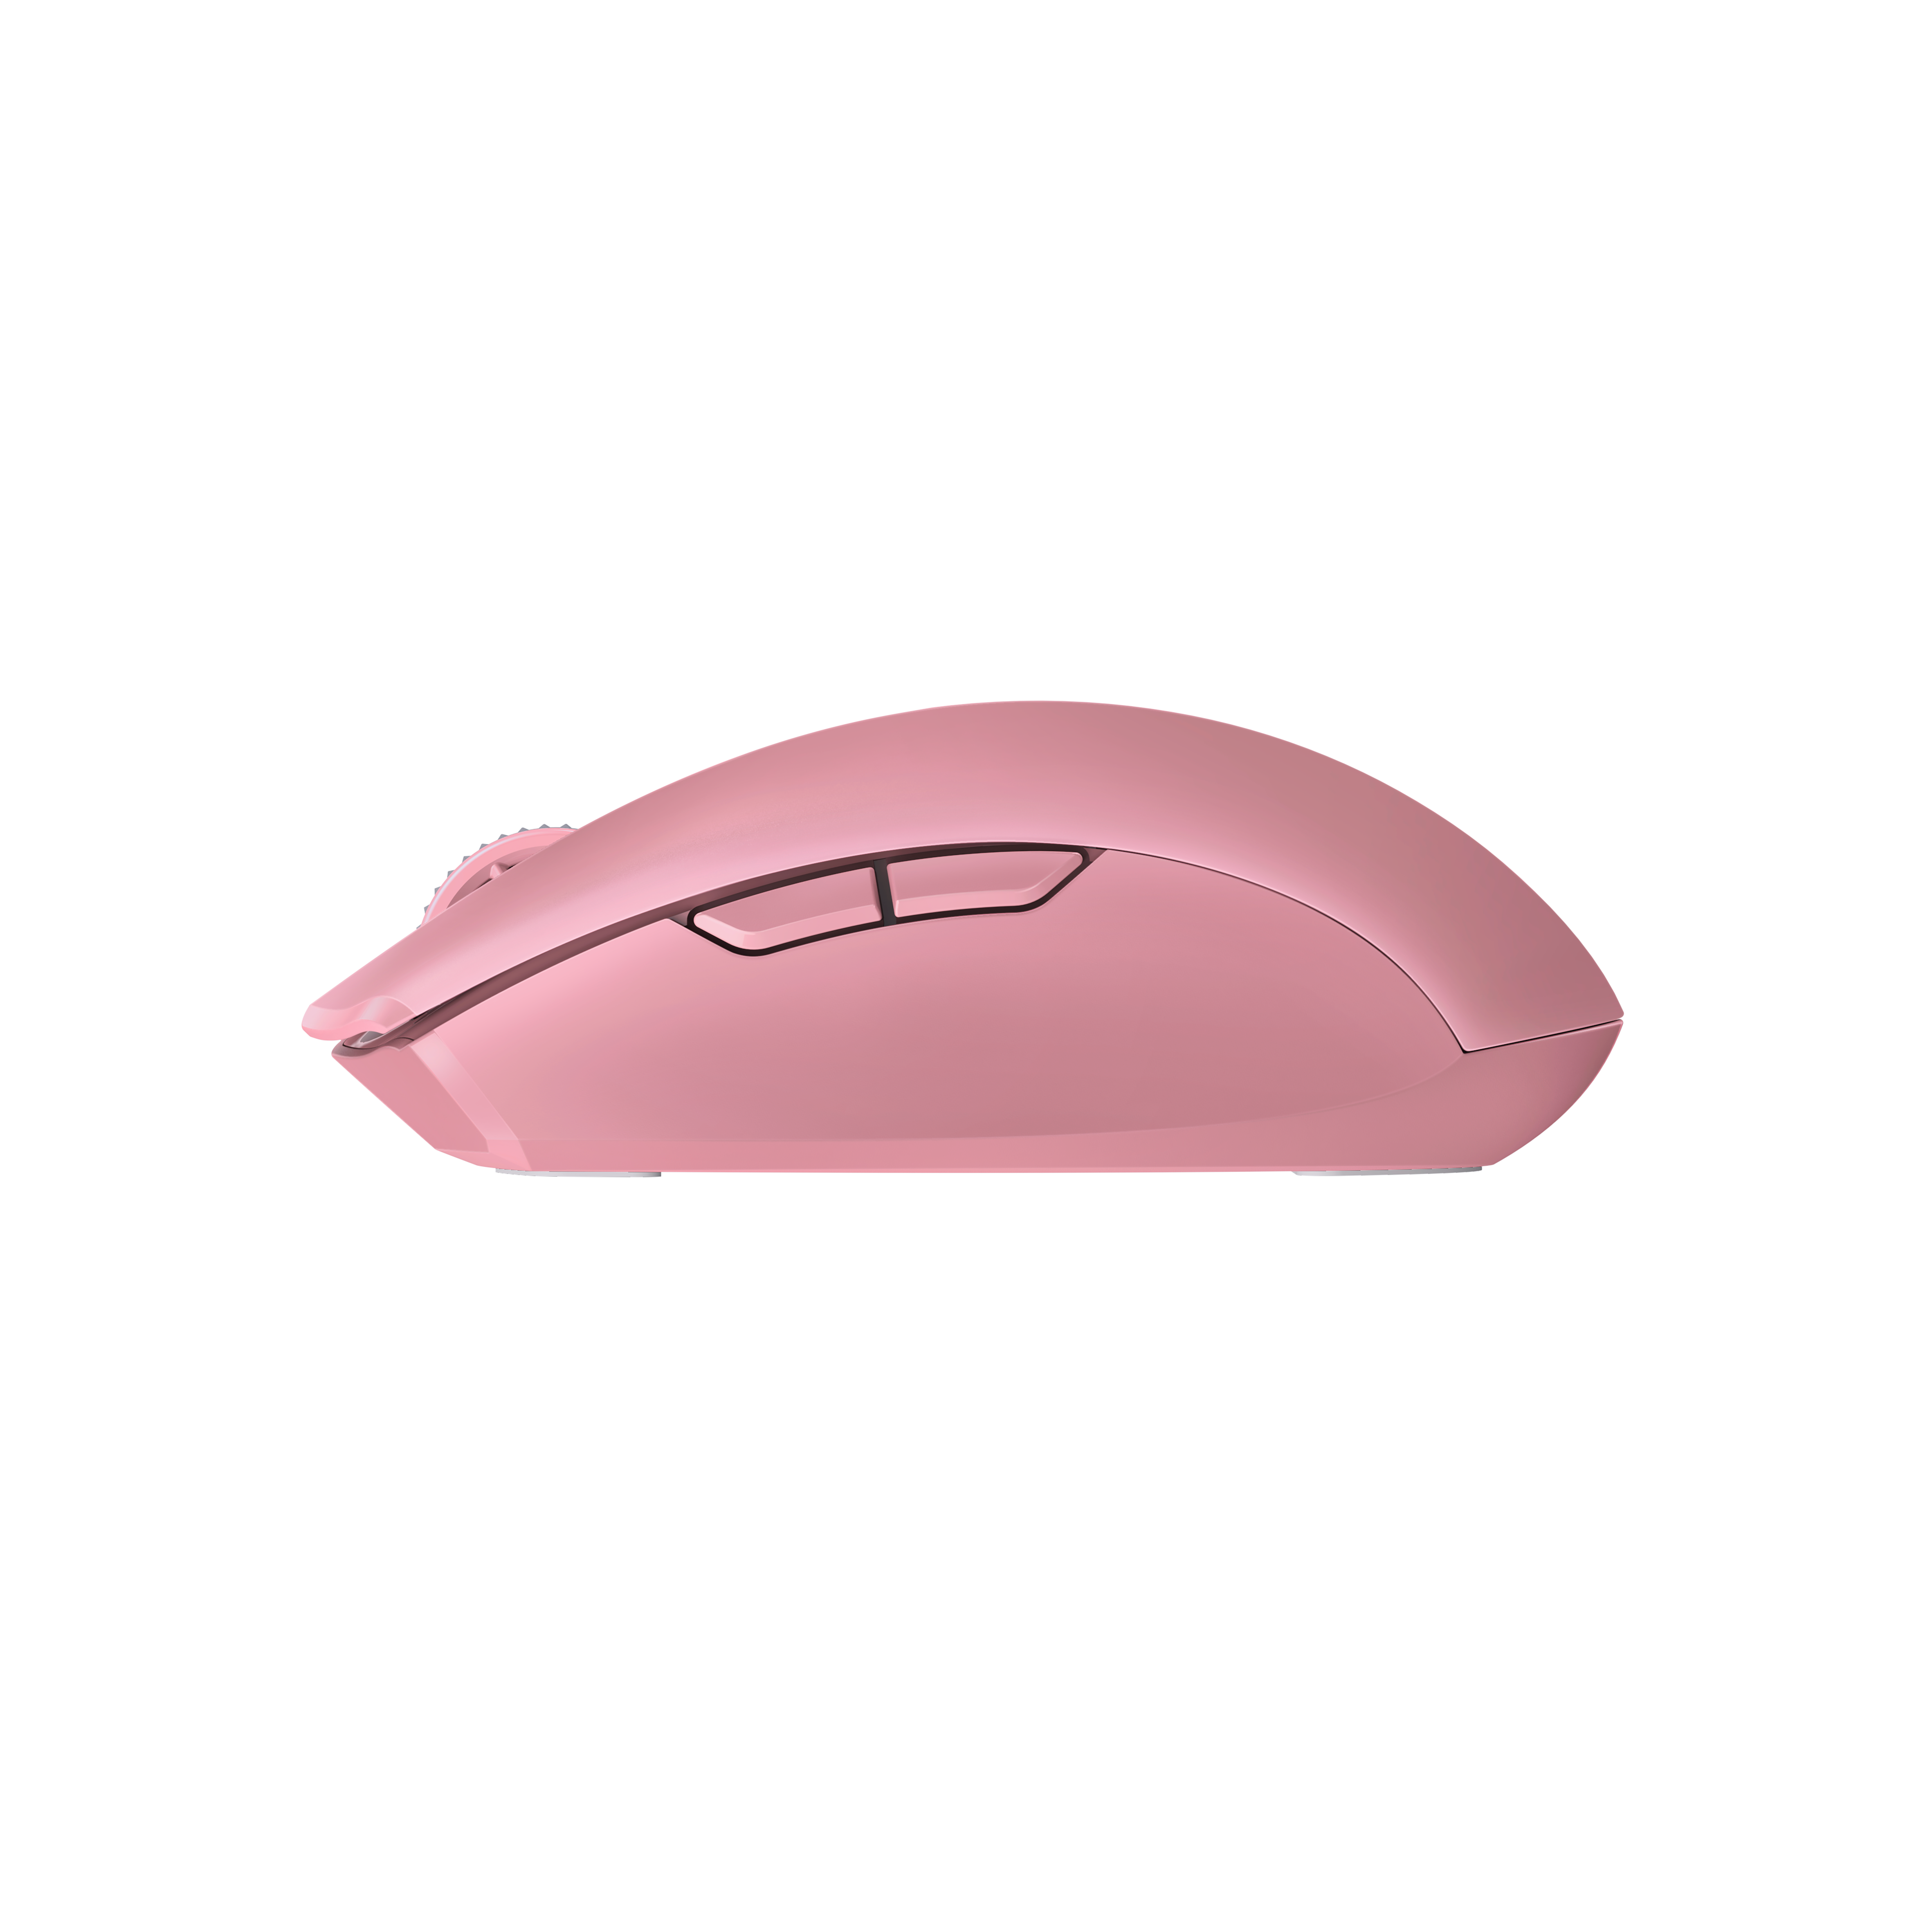  Razer Orochi V2 Mobile Wireless Gaming Mouse: Ultra Lightweight  - 2 Wireless Modes - Up to 950 Hr Battery Life - Mechanical Mouse Switches  - 5G Advanced 18K DPI Optical Sensor - Quartz Pink : Video Games